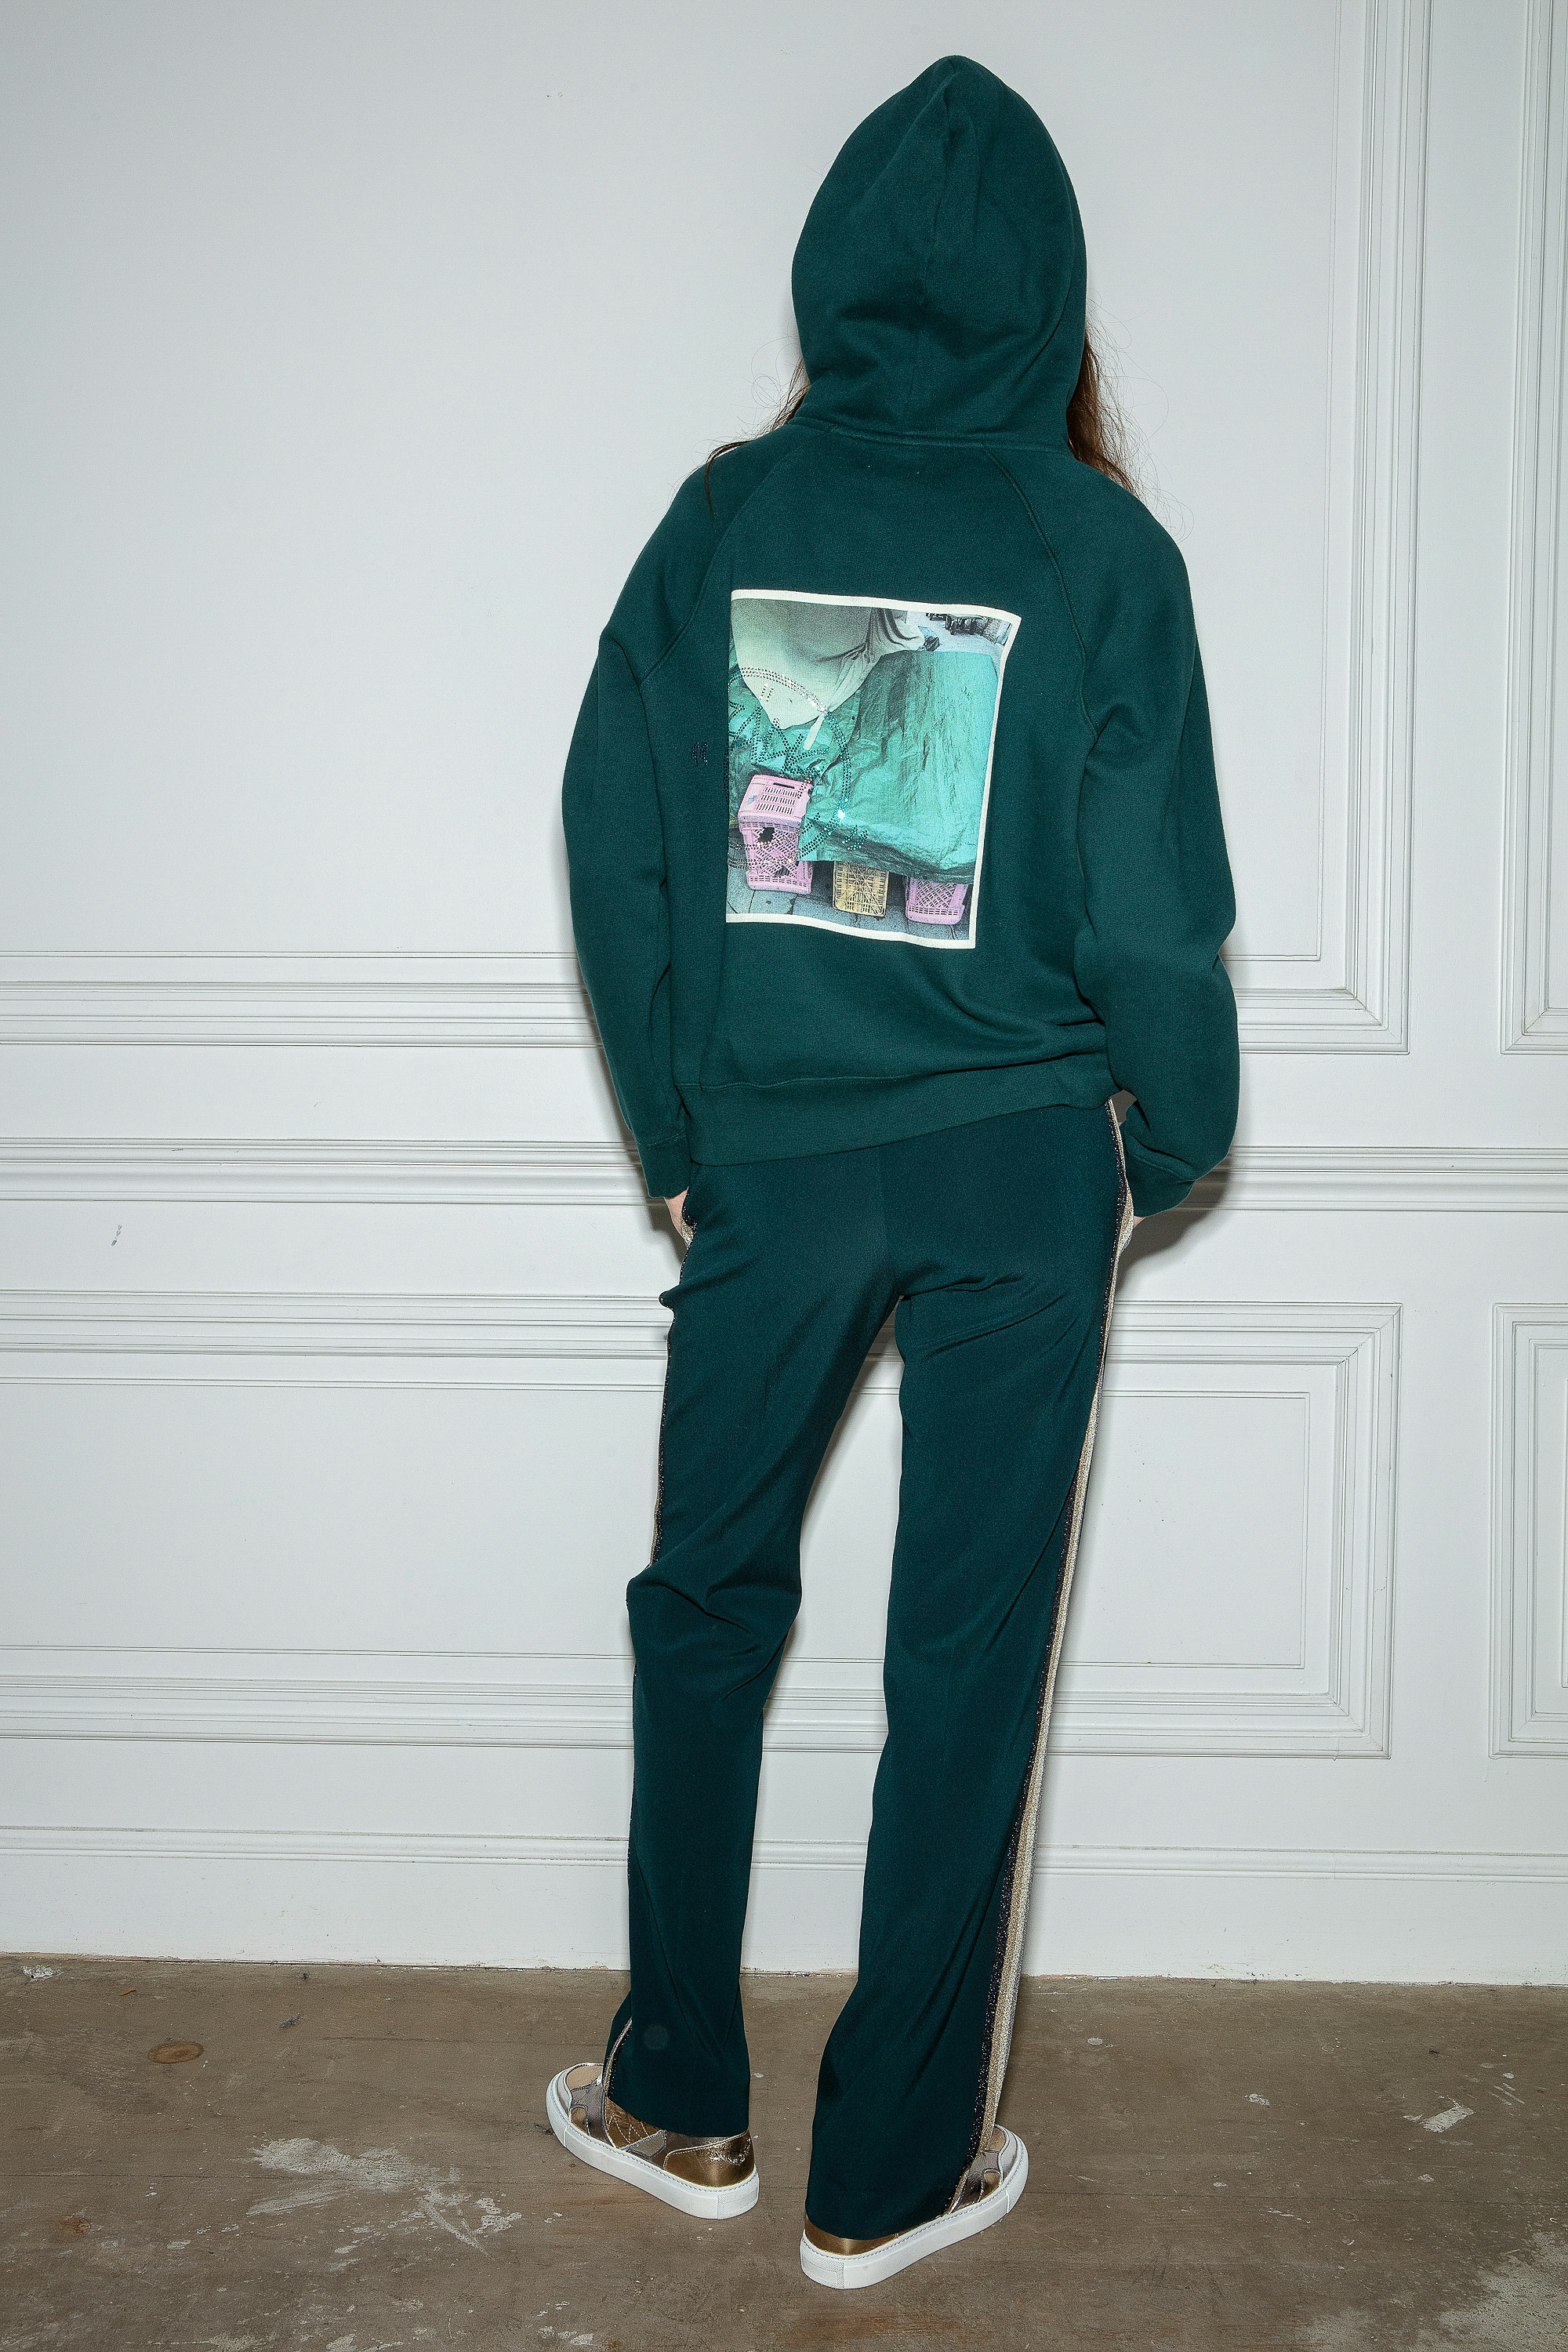 Georgy フォトプリント Color Box スウェット Women’s green cotton sweatshirt with photoprint and diamanté on the back